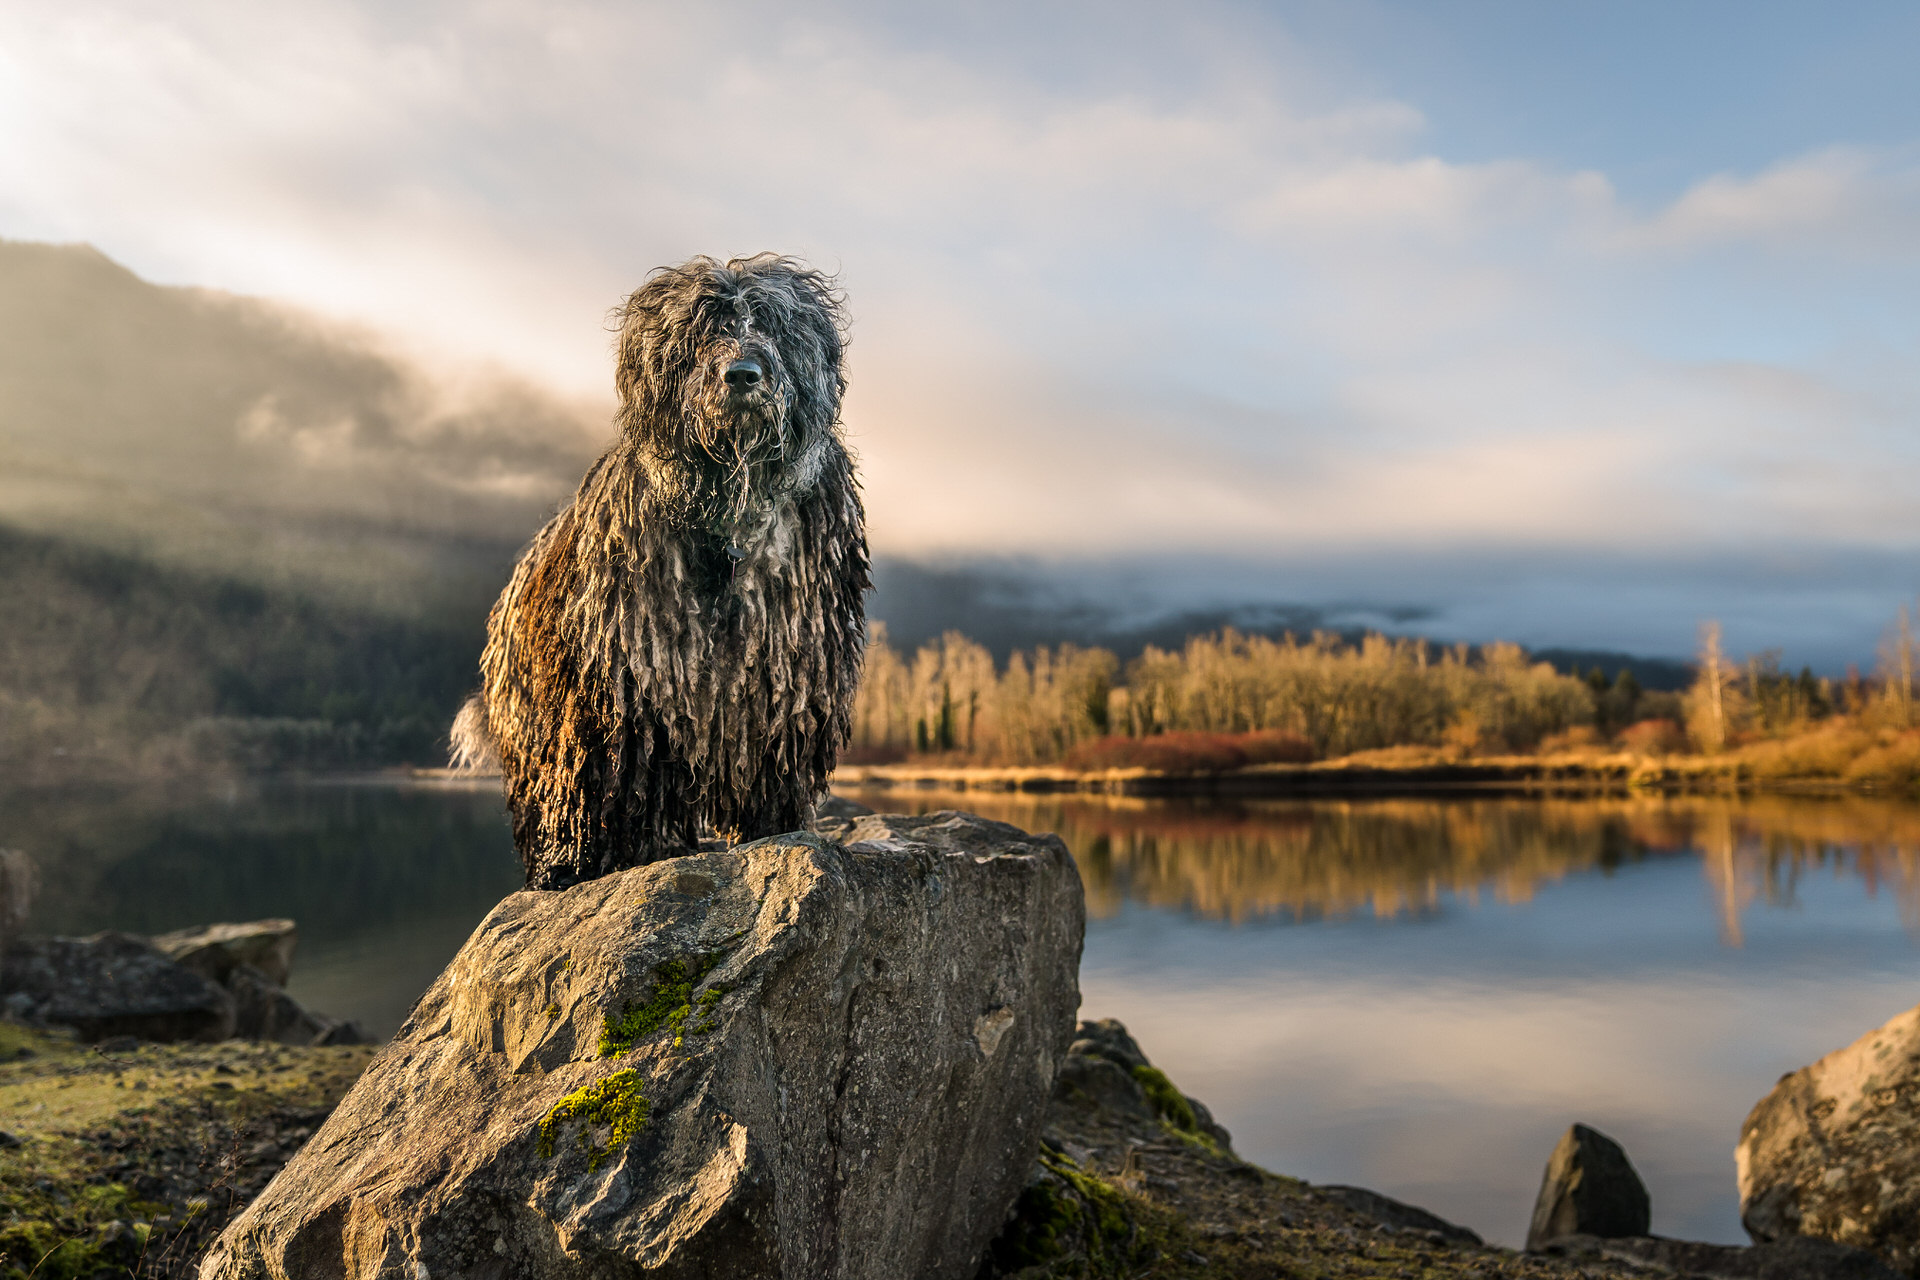 Bergamasco shepherd sits on a rock in the early morning in a beautiful landscape overlooking water